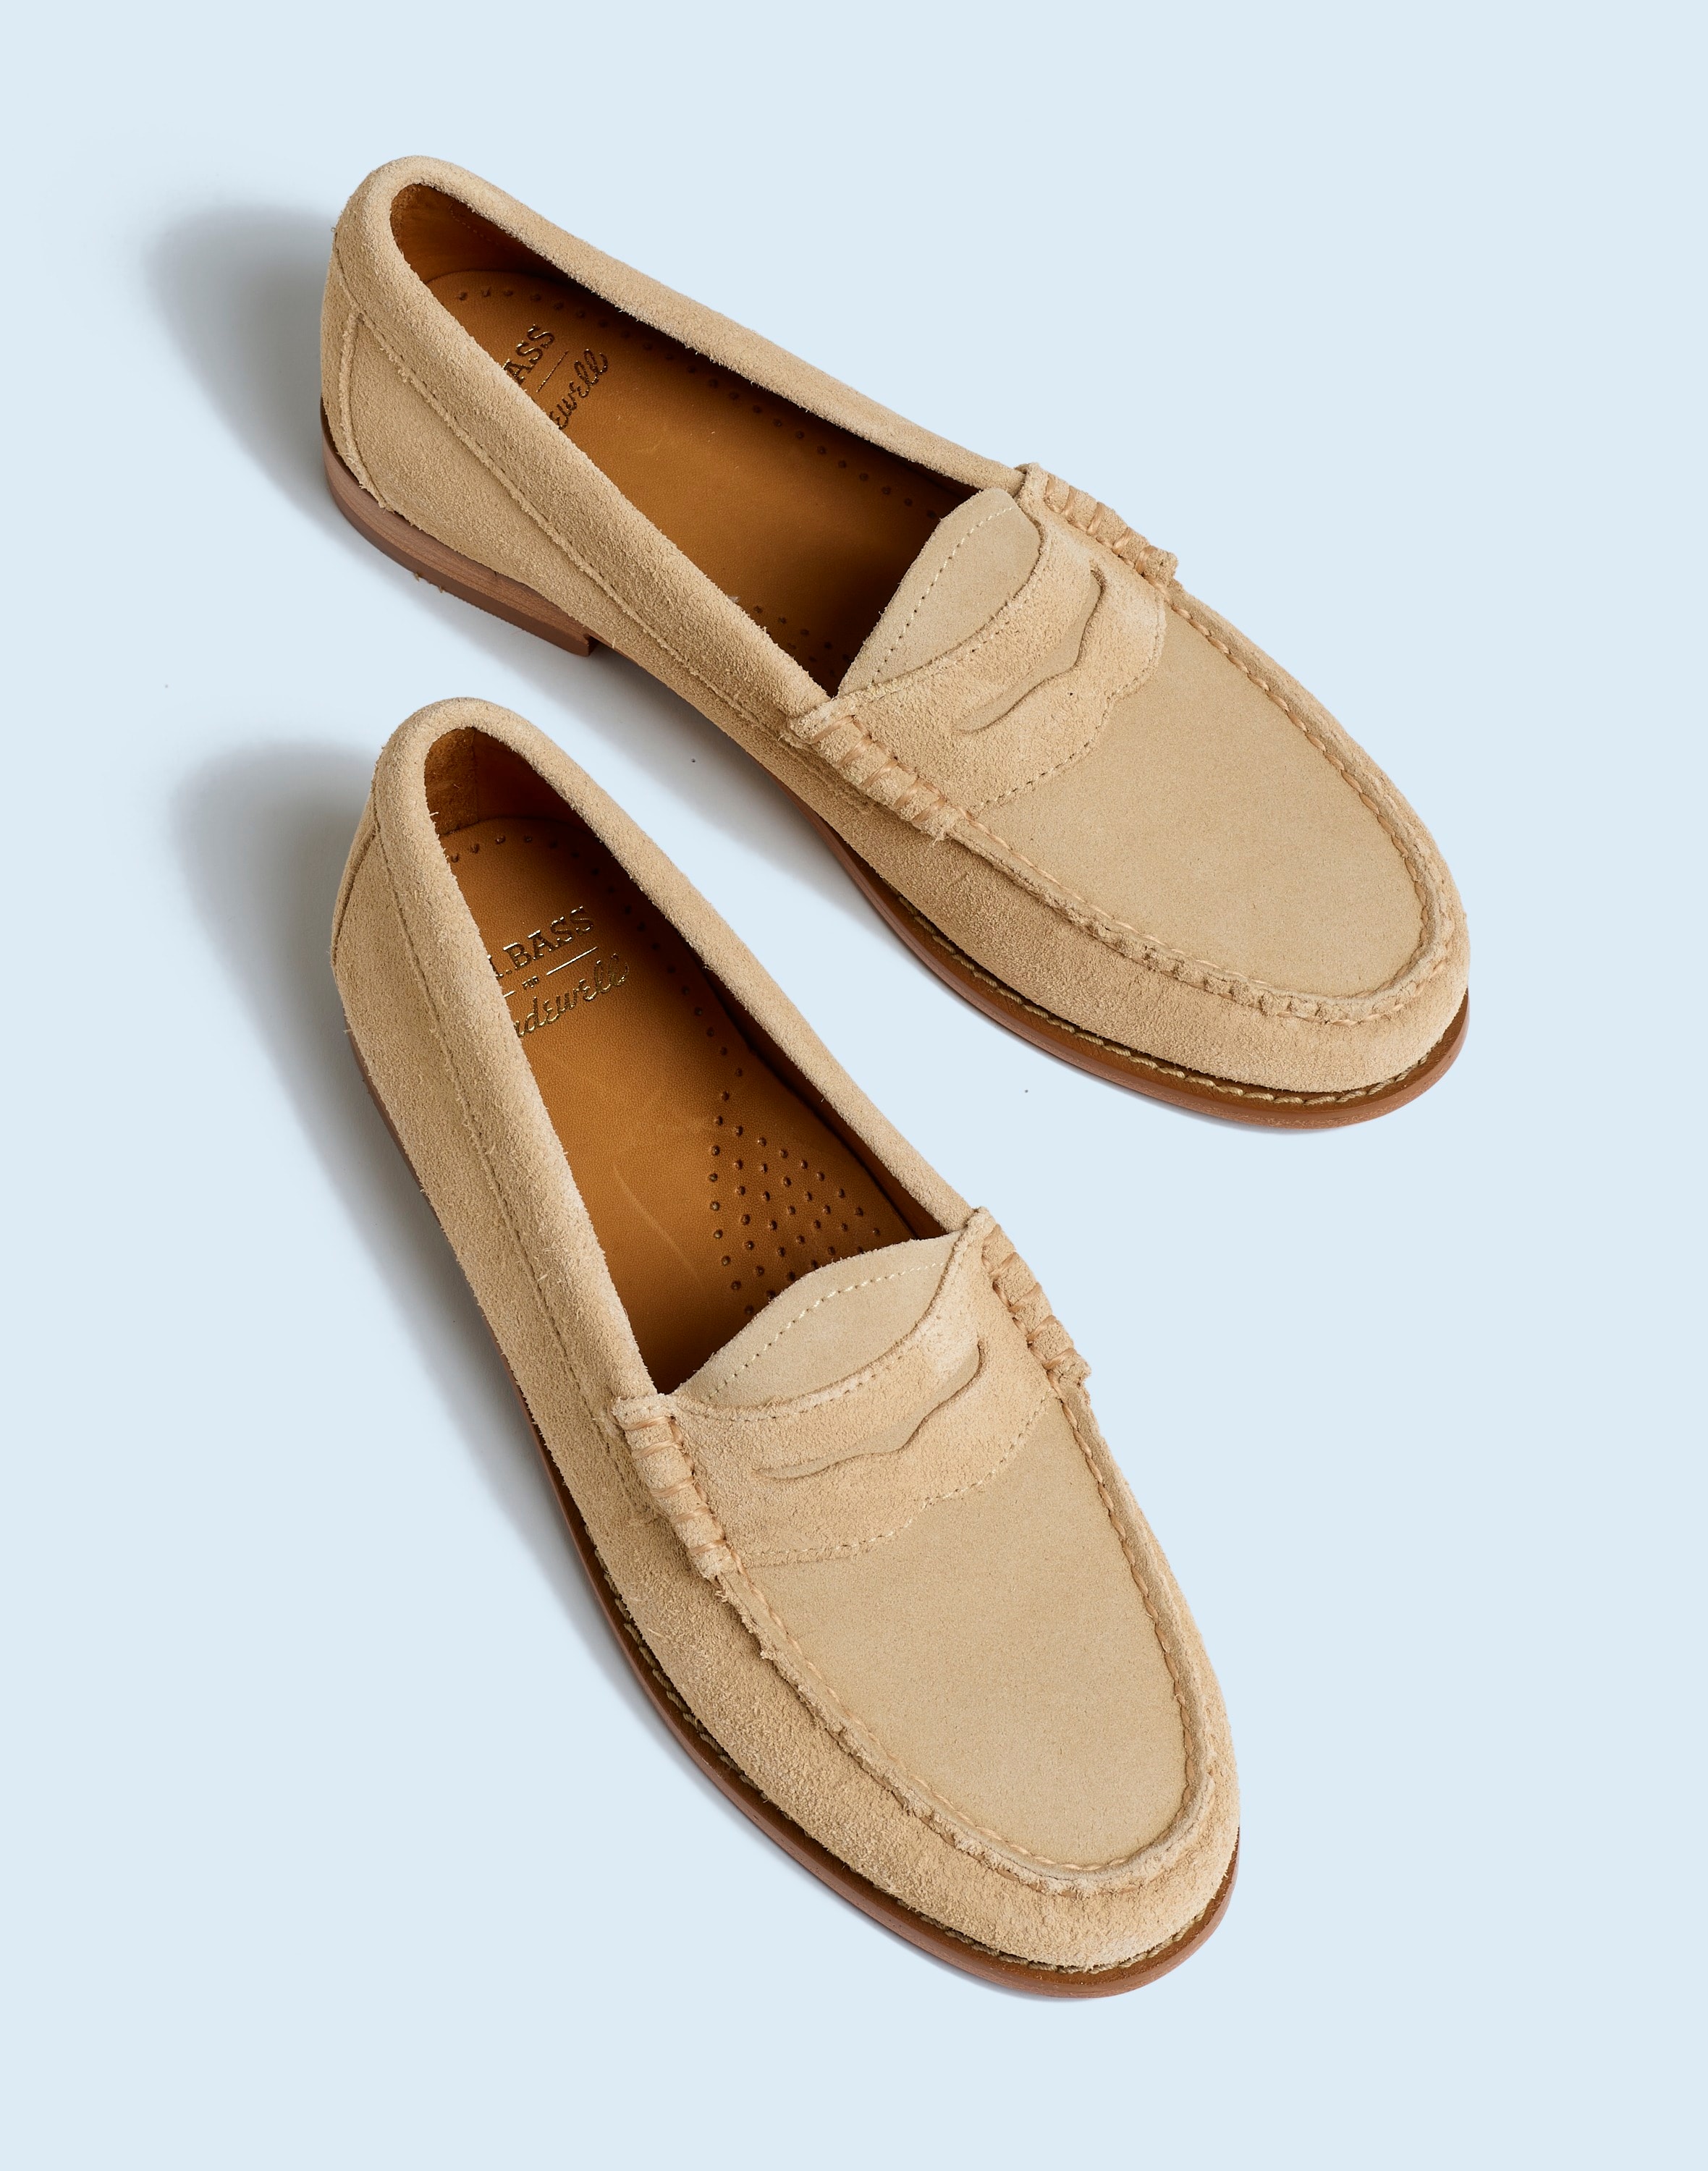 Madewell x G.H.BASS Whitney Weejuns® Loafers